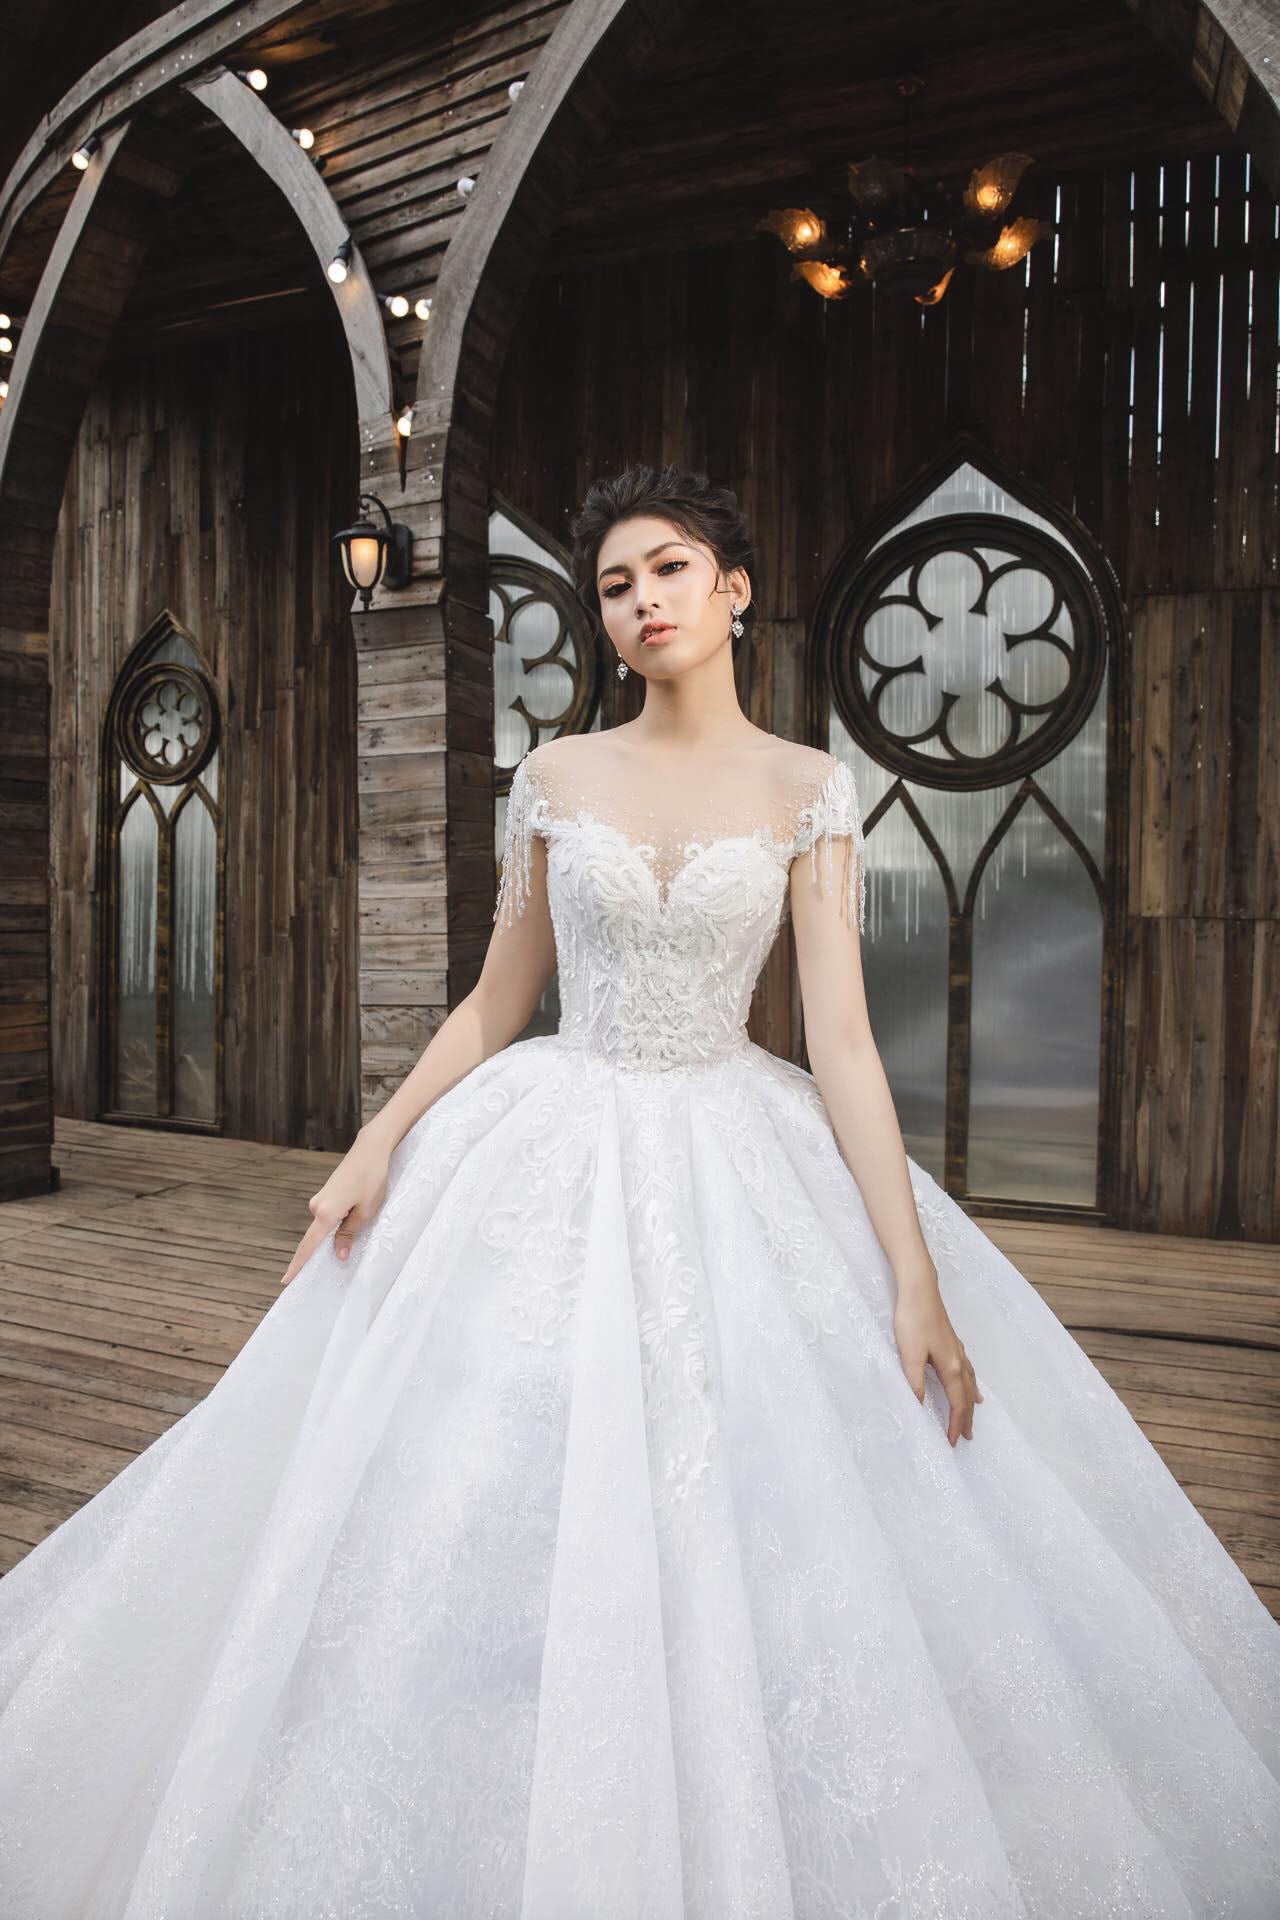 Omorose - Radiate Elegance: Off-Shoulder A-Line Princess Wedding Dress with Sparkling and Luxury Accents